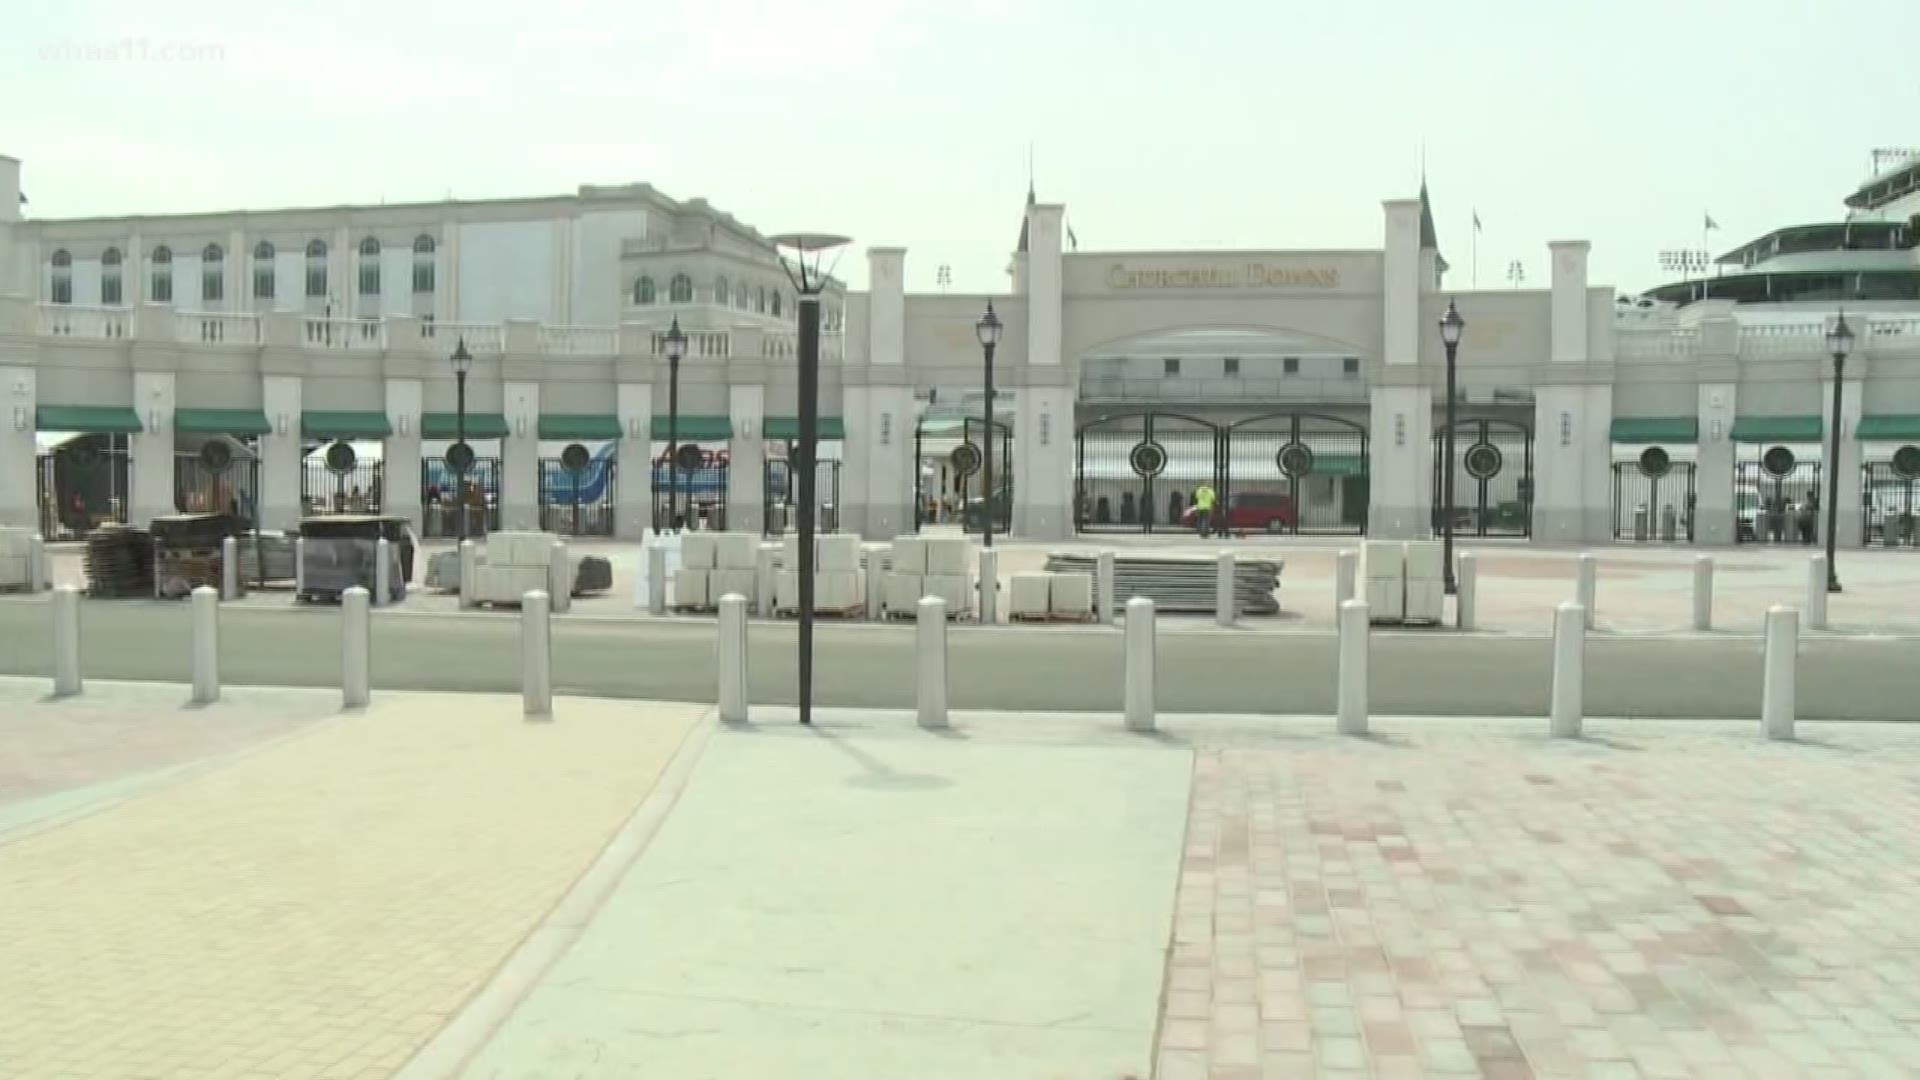 Churchill Downs rushes to finish renovations